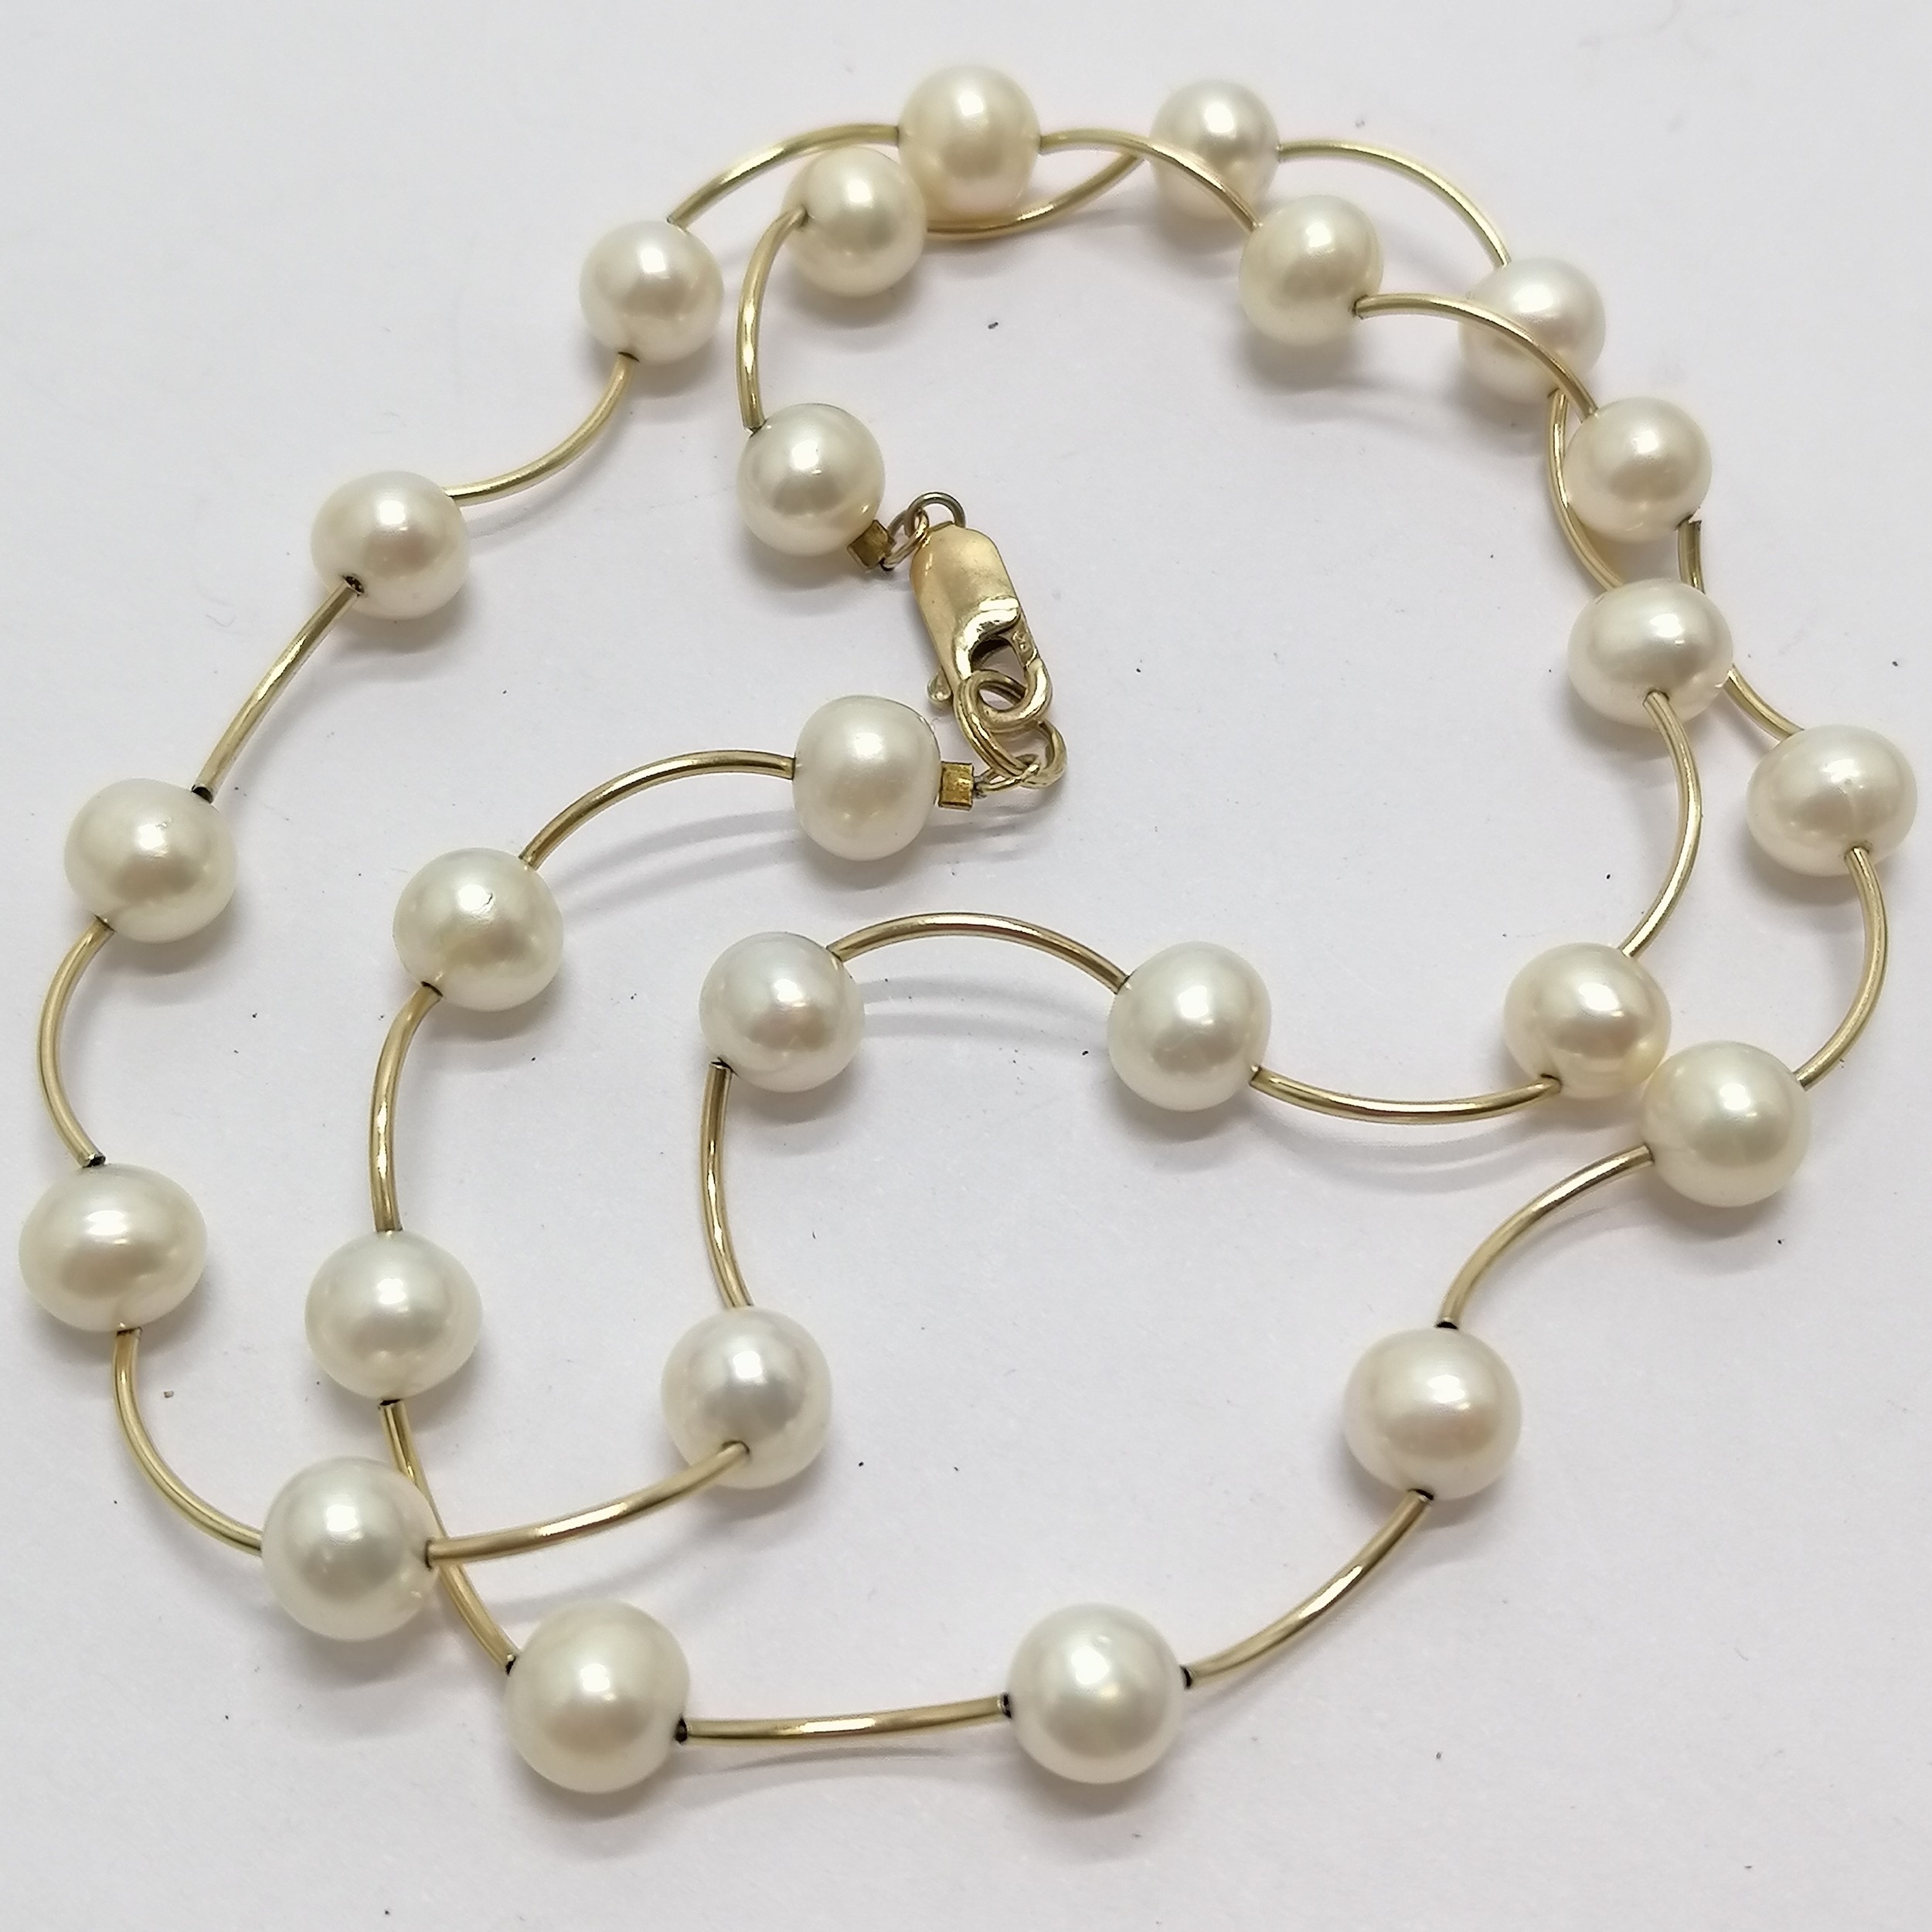 9ct marked gold pearl bead necklace - 46cm & 13.5g total weight - SOLD ON BEHALF OF THE NEW BREAST